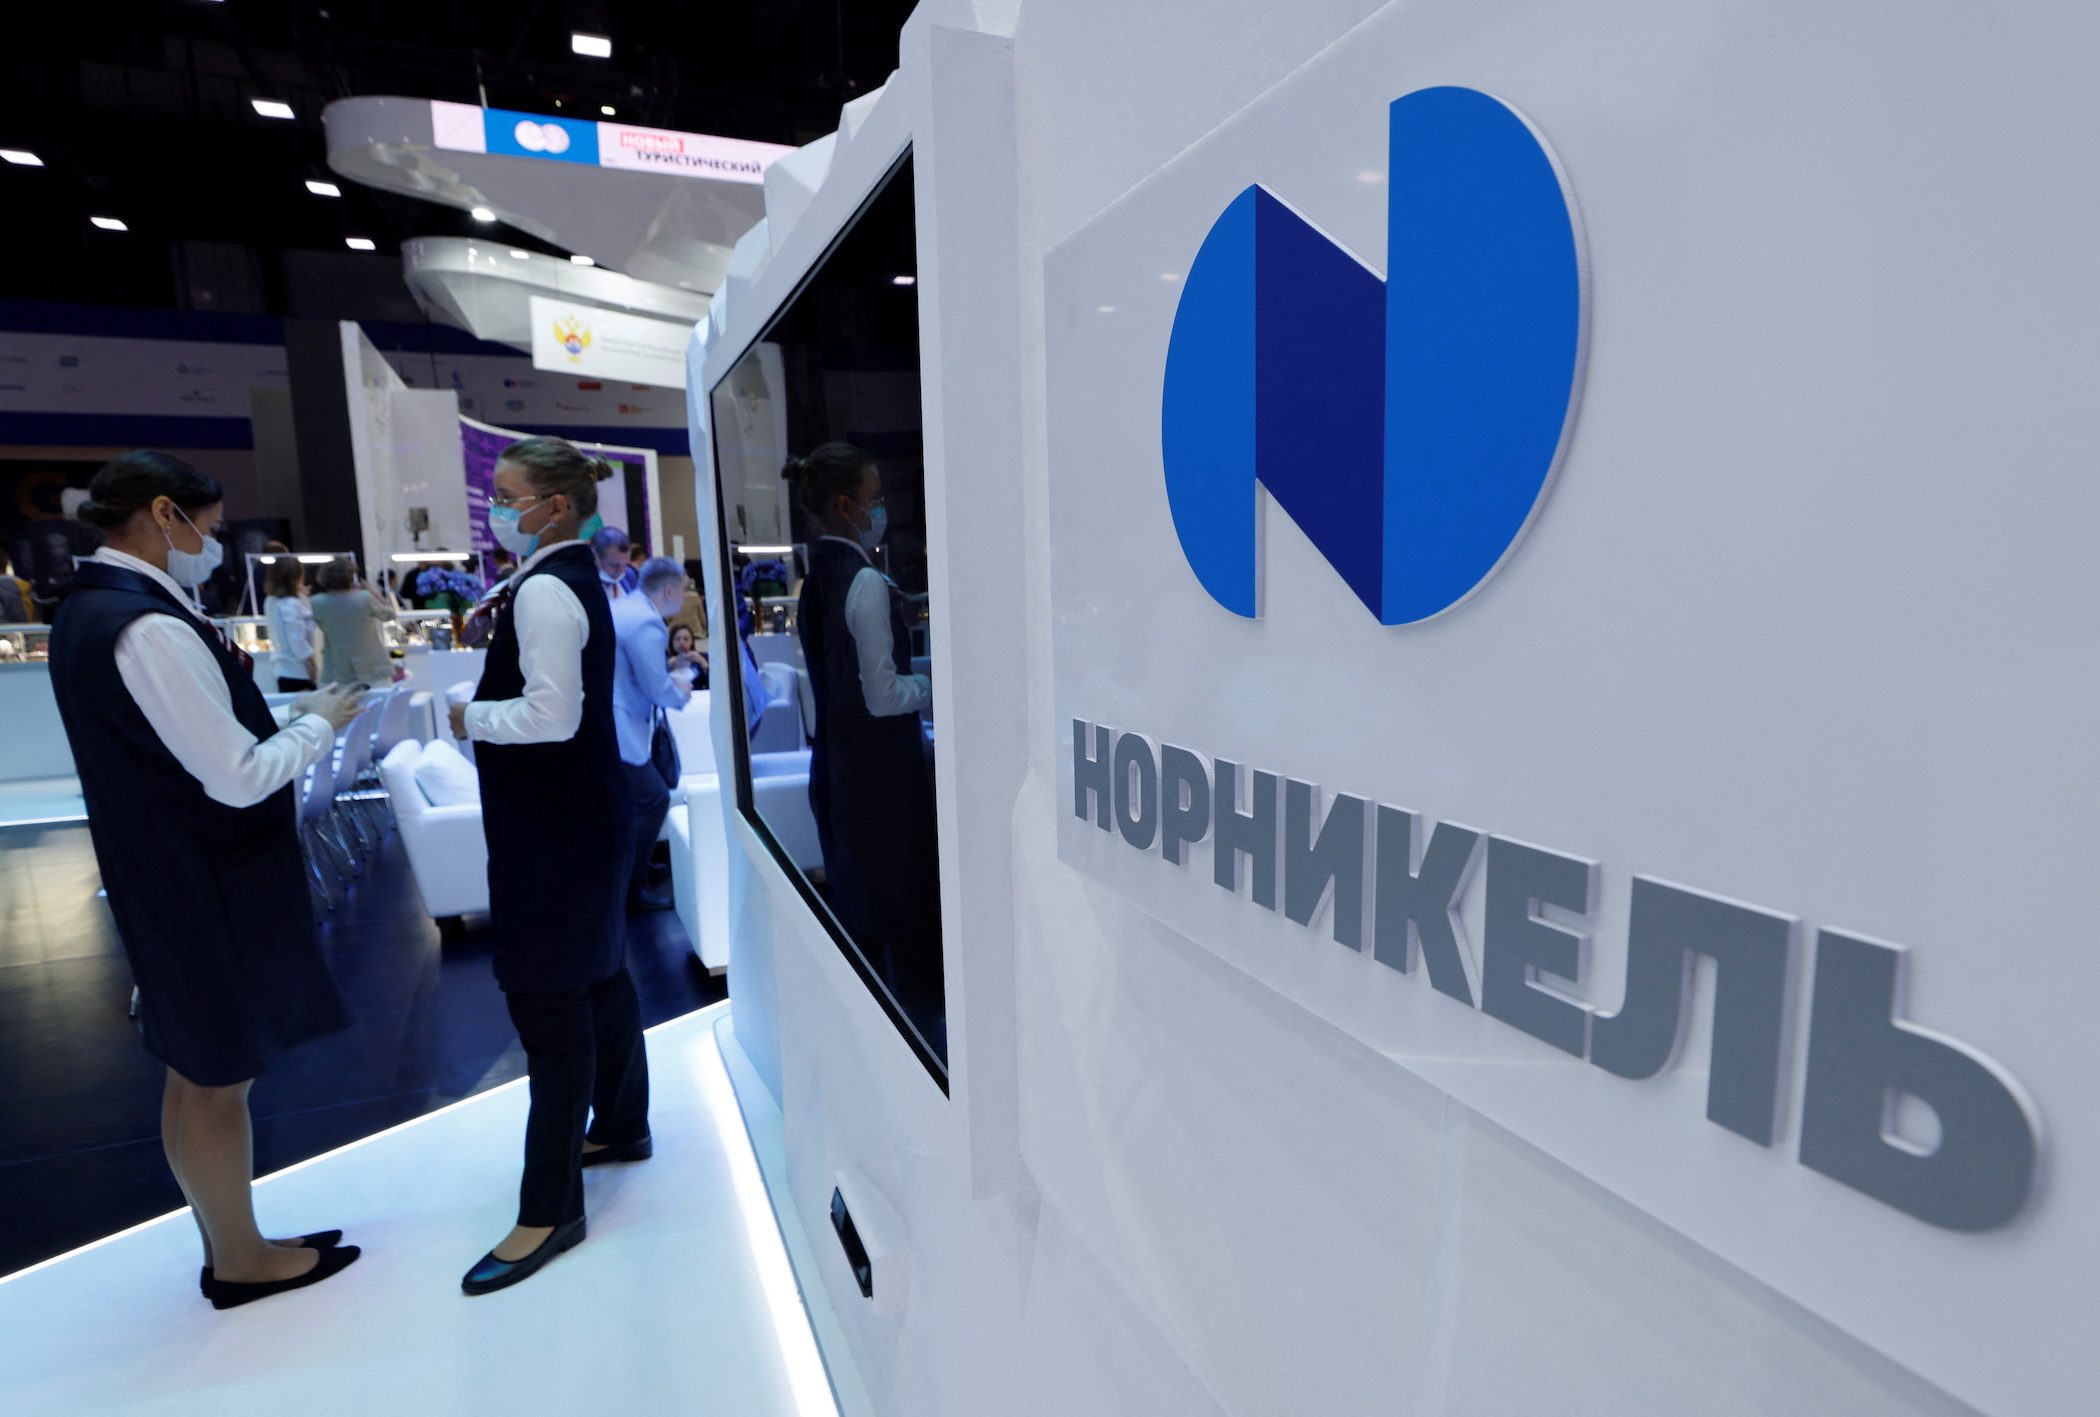 Russia’s Potanin ready to discuss Nornickel-Rusal merger